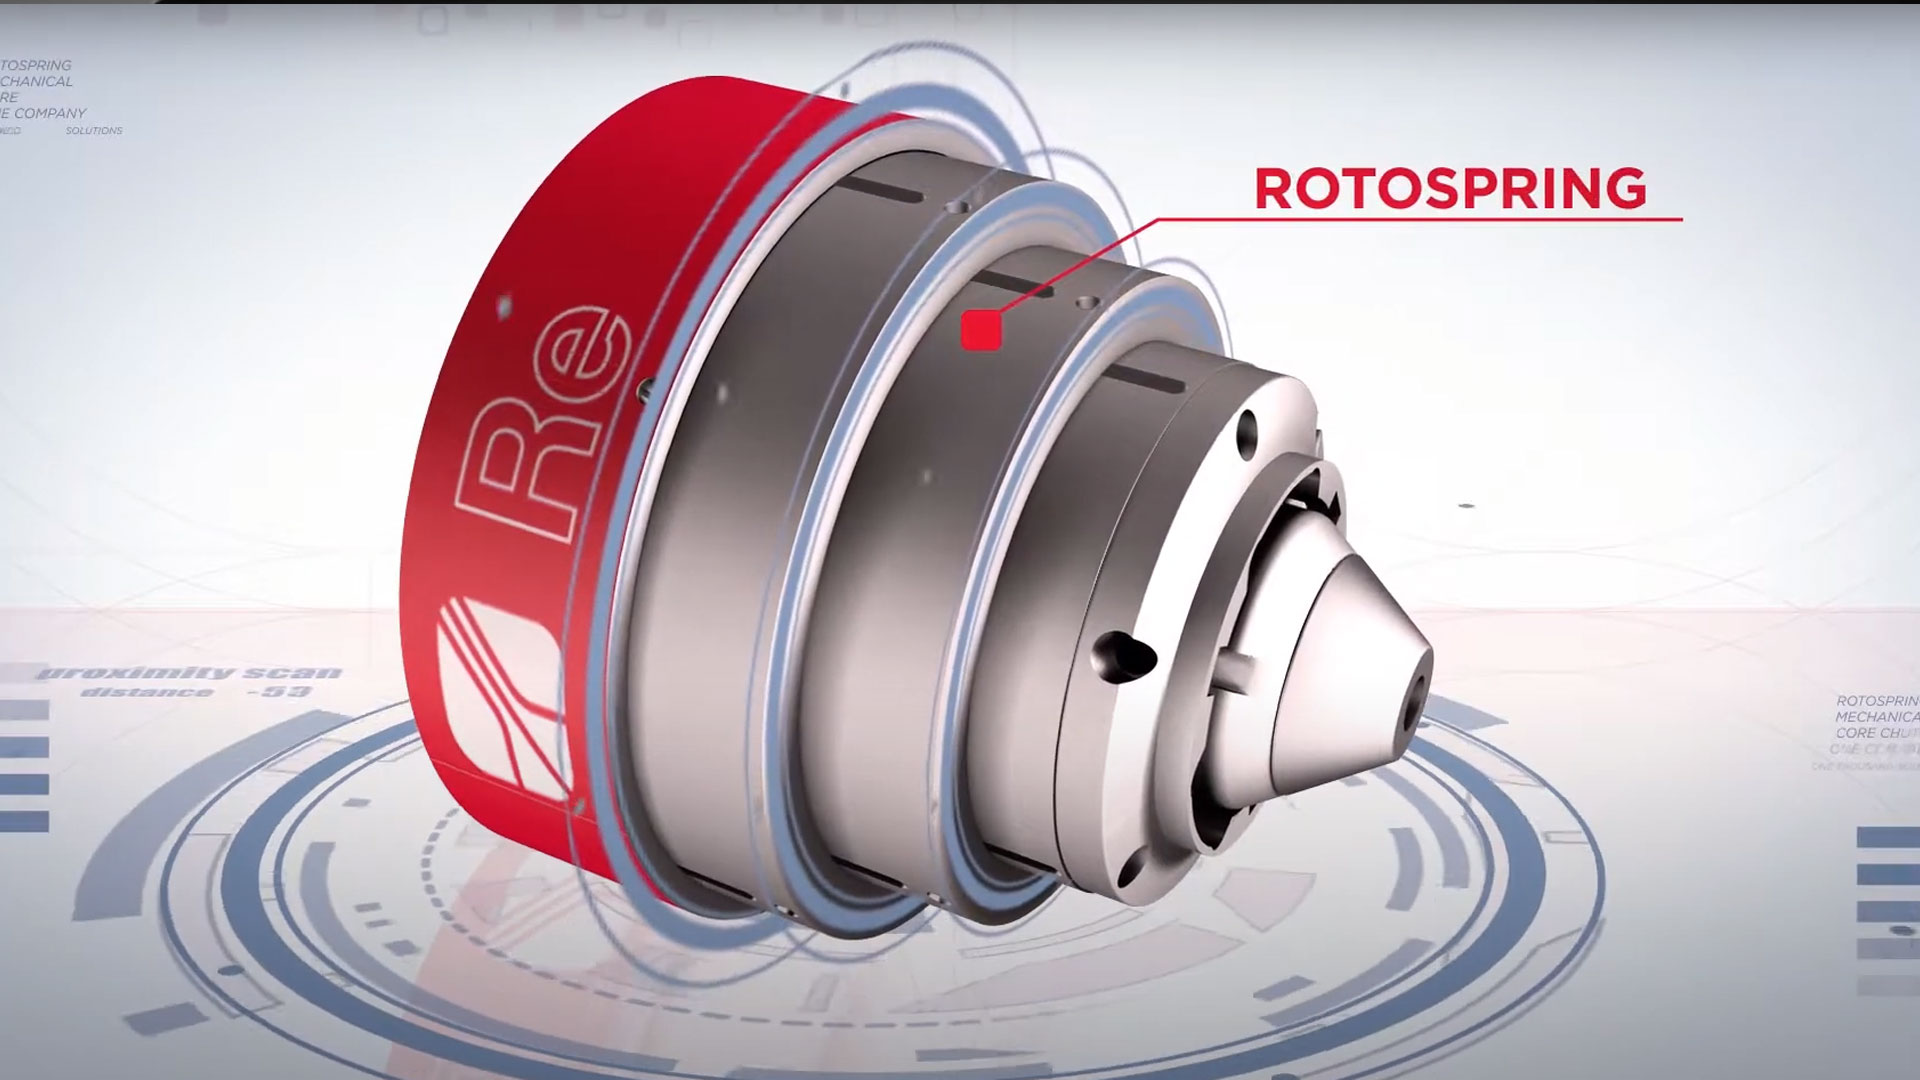 RE PRODUCT - Rotospring - Video fiera